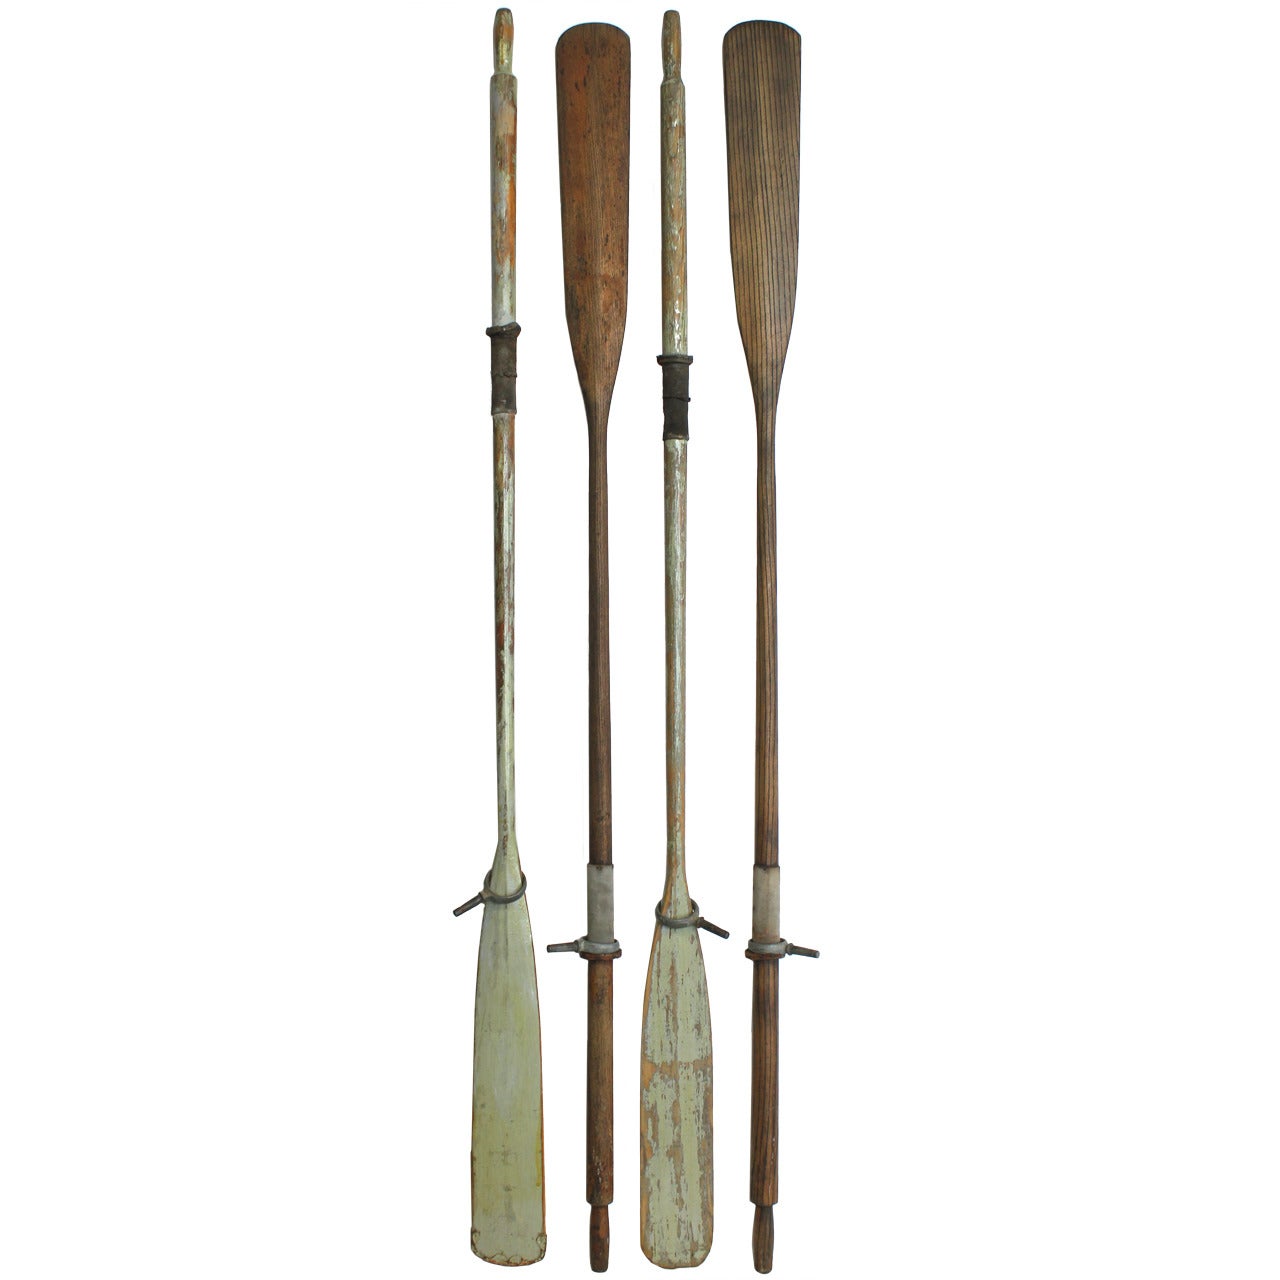 Collection of Vintage Oars with Leather Holders